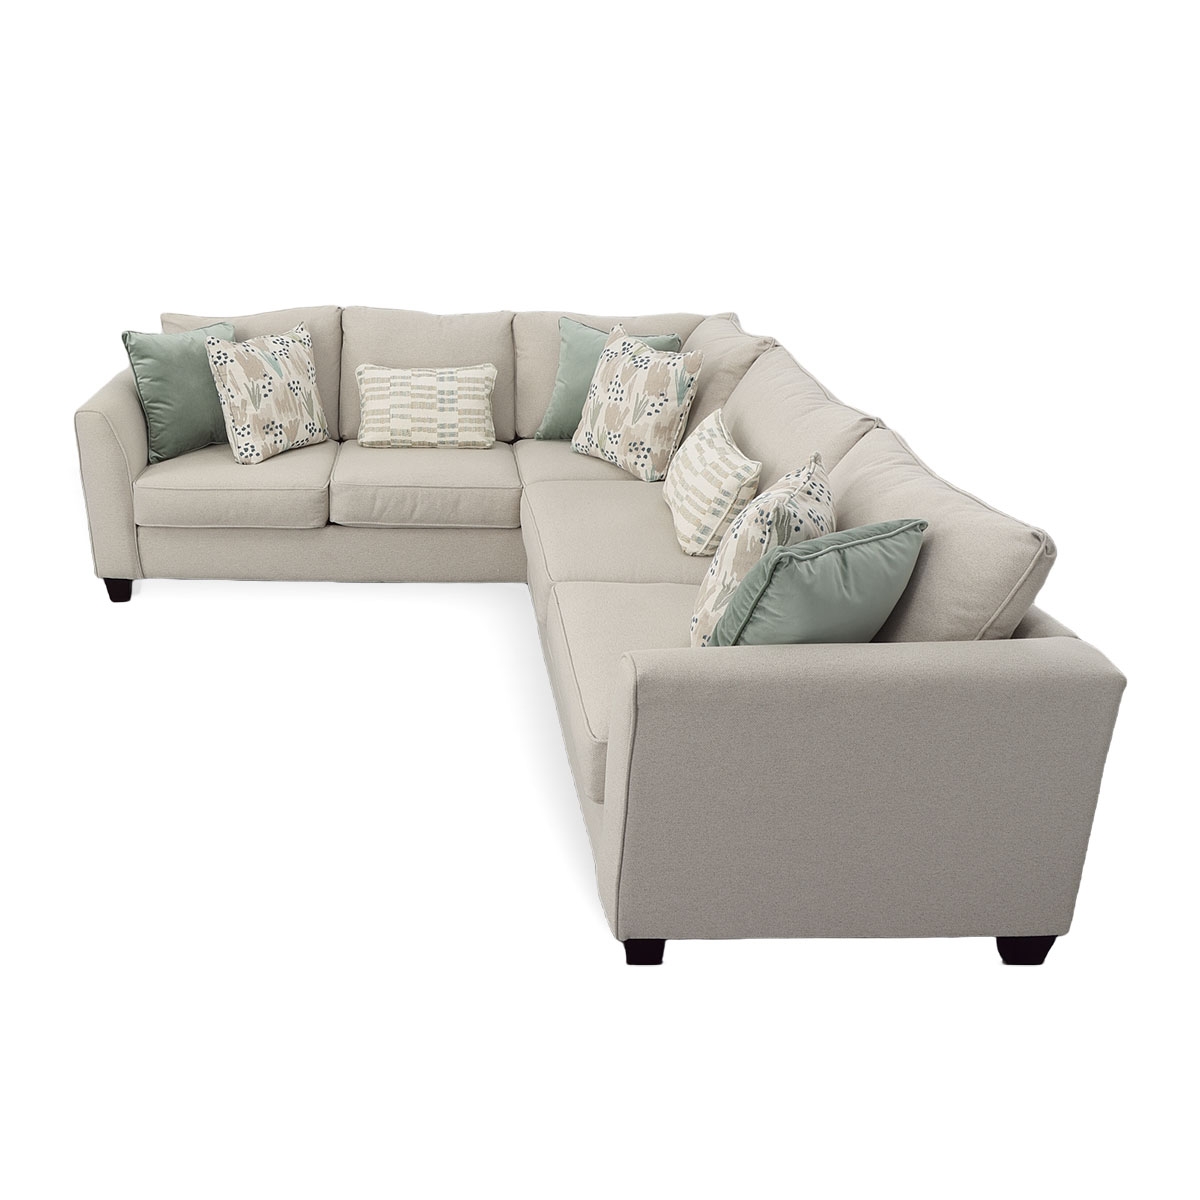 Picture of CARRIE 2PC "L" SHAPE SECTIONAL